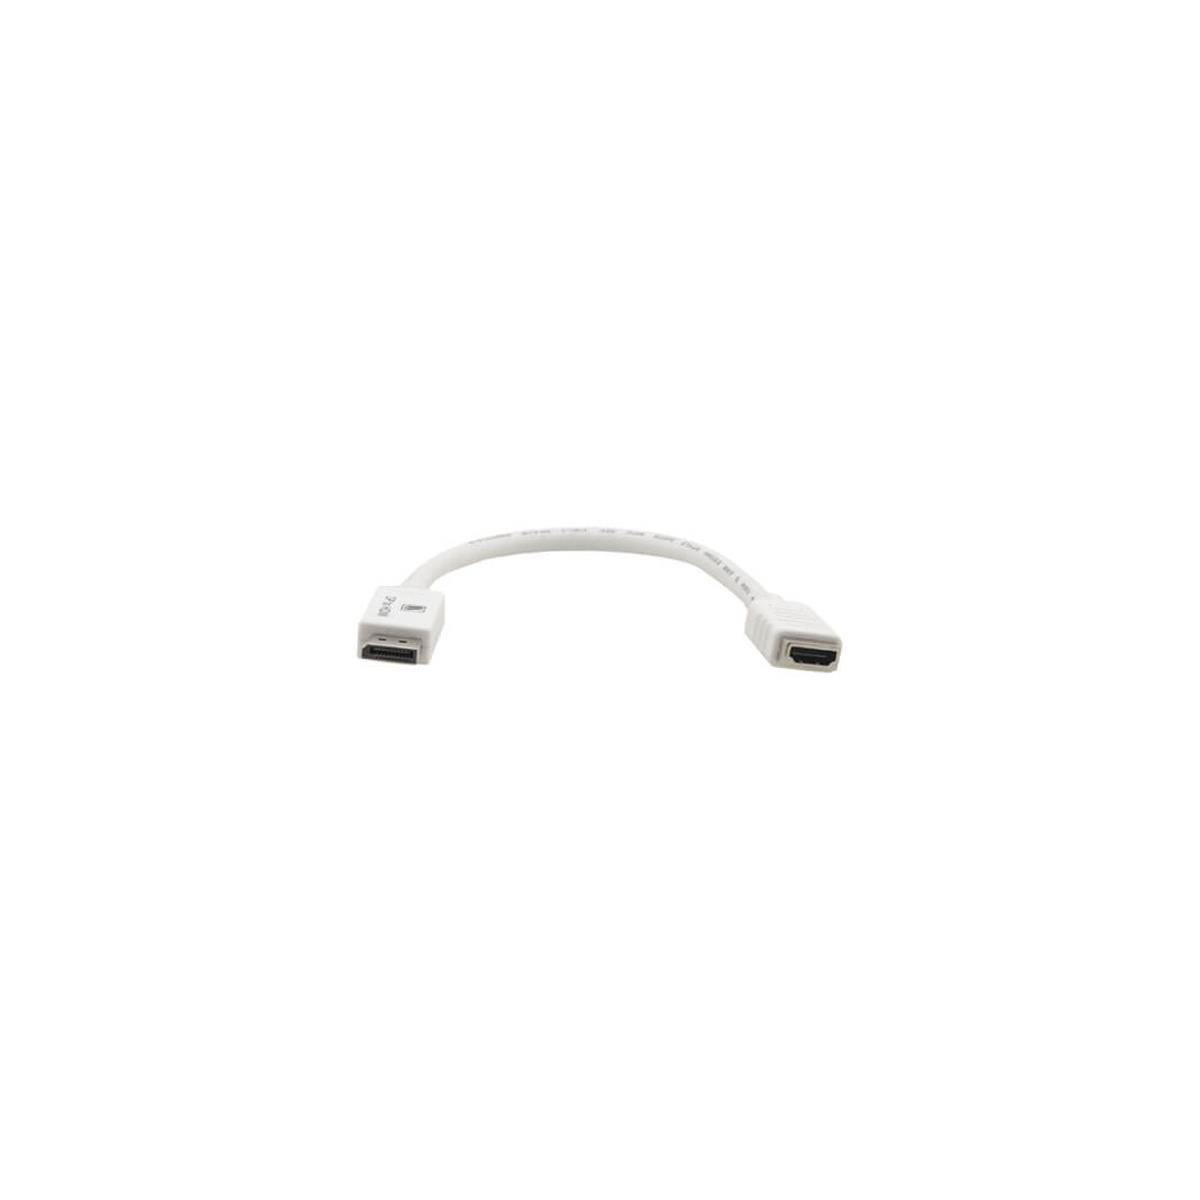 Image of Kramer Electronics ADC-DPM/HF DisplayPort (M) to HDMI (F) Adapter Cable